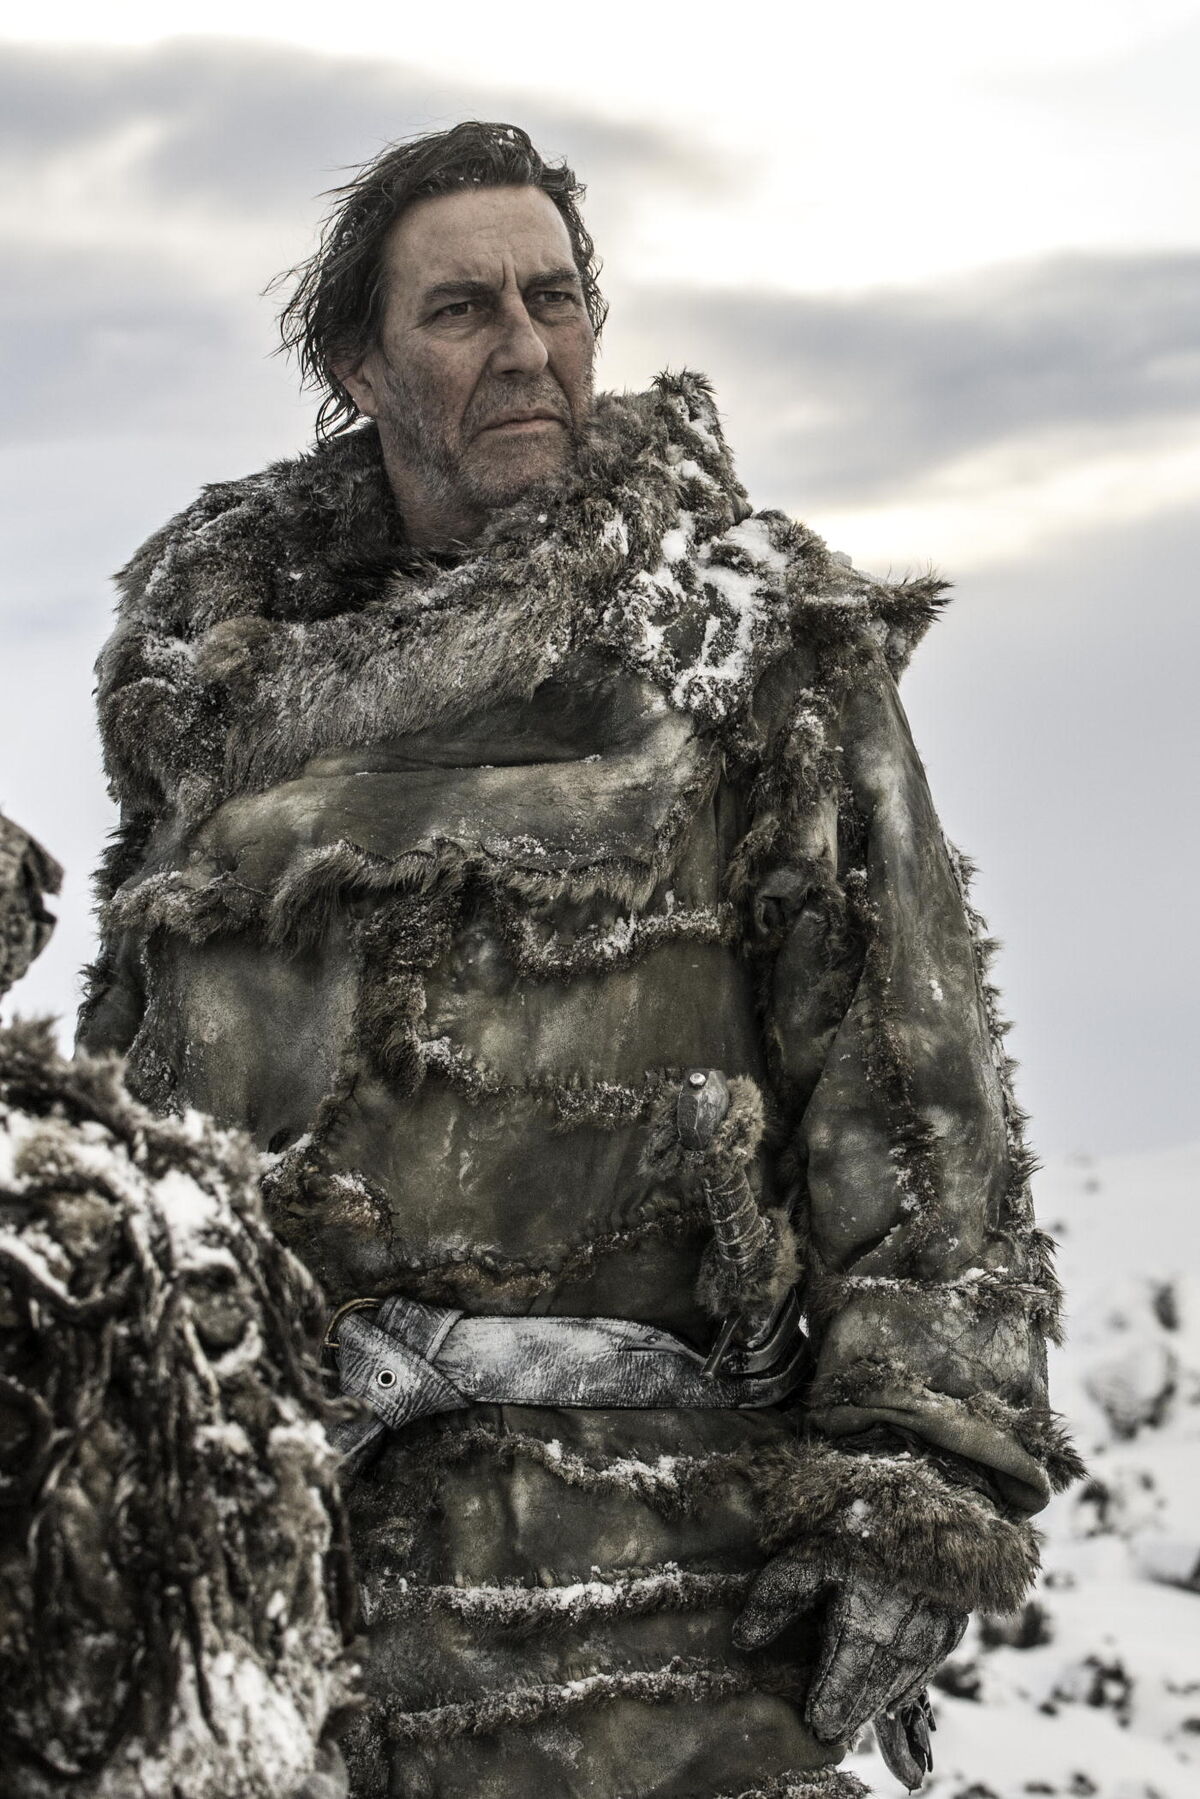 Game of Thrones' Director Breaks Down Timeline in 'Beyond the Wall